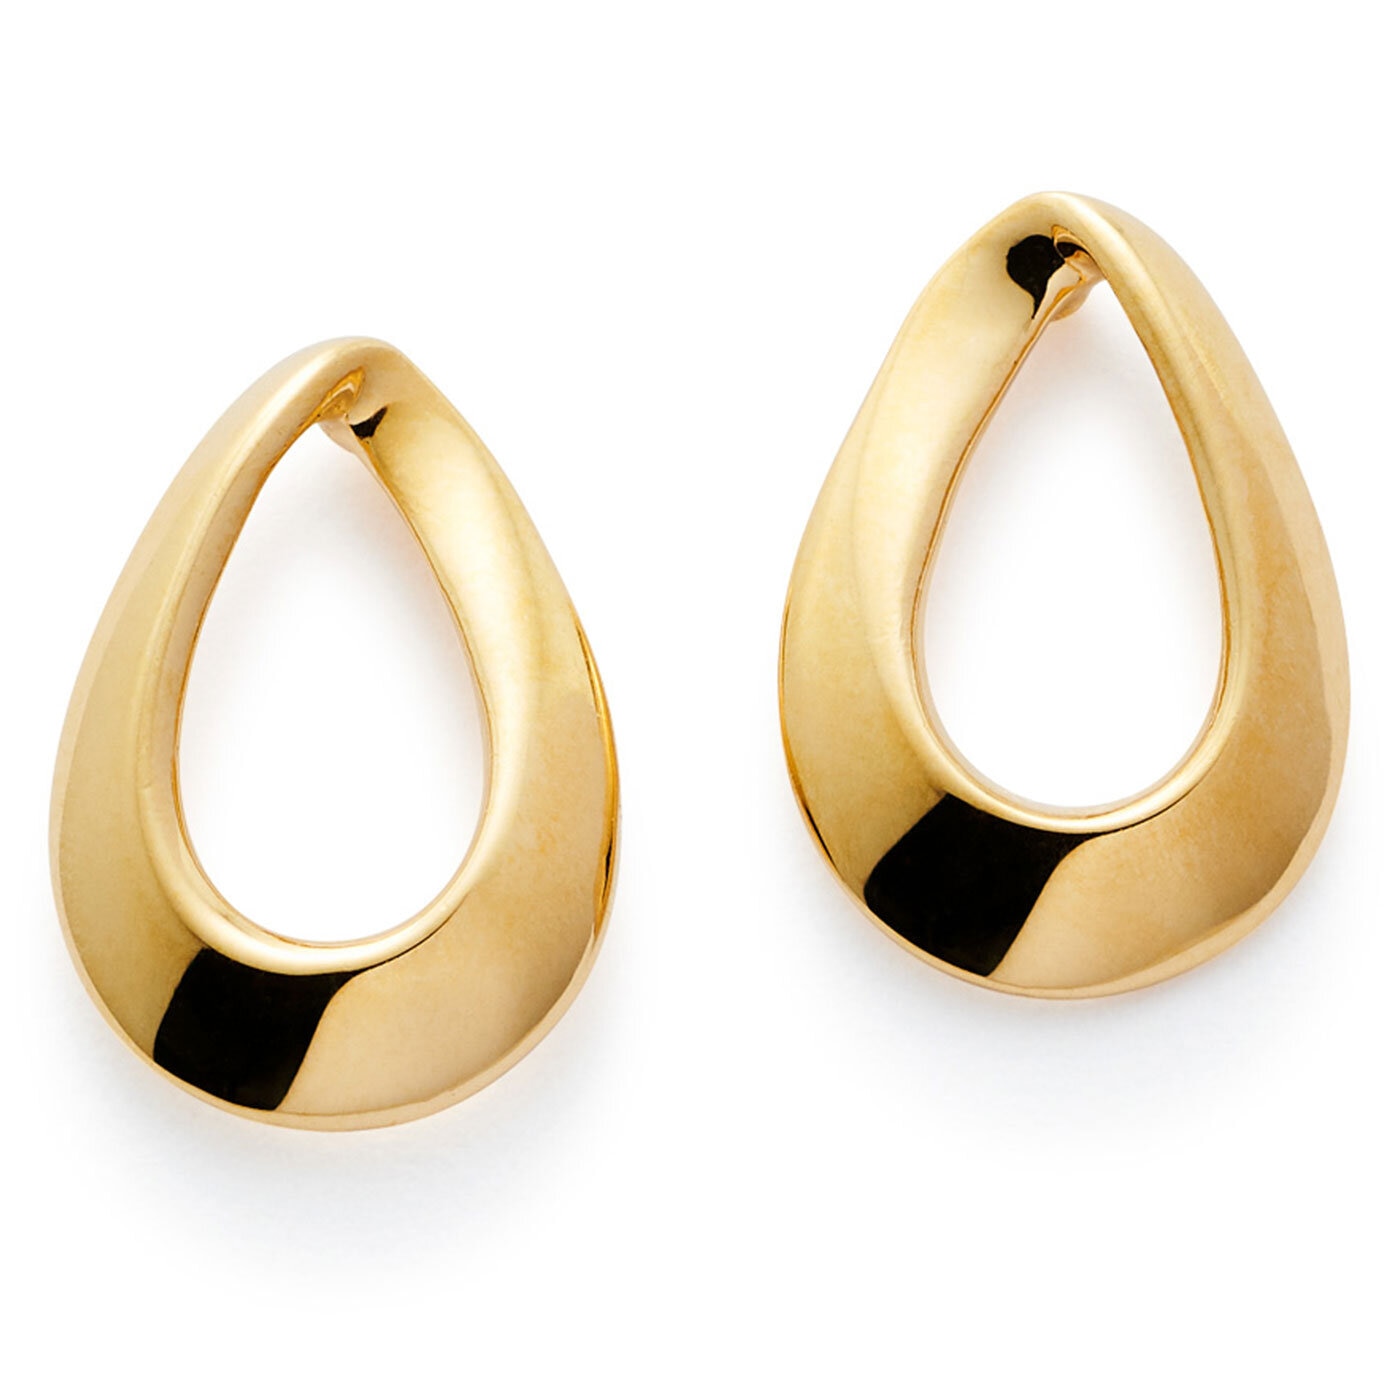 Hollow drop earrings Gold Plated         